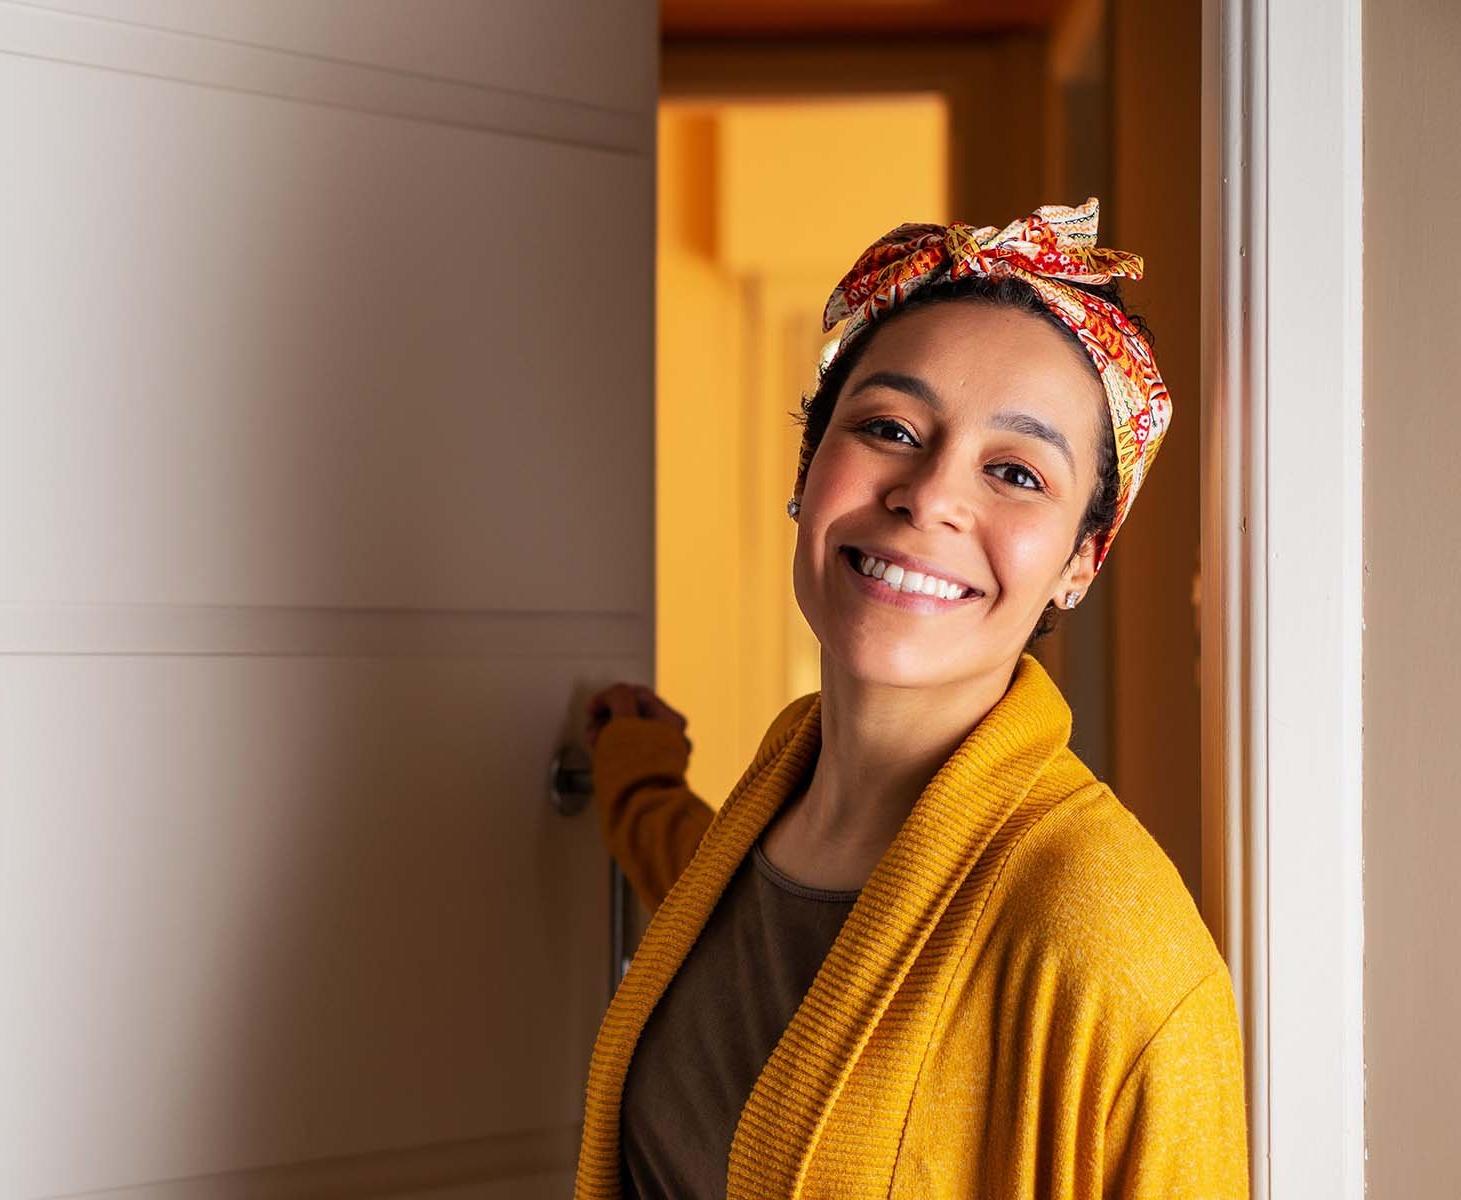 A smiling woman in a yellow headwrap and sweater.